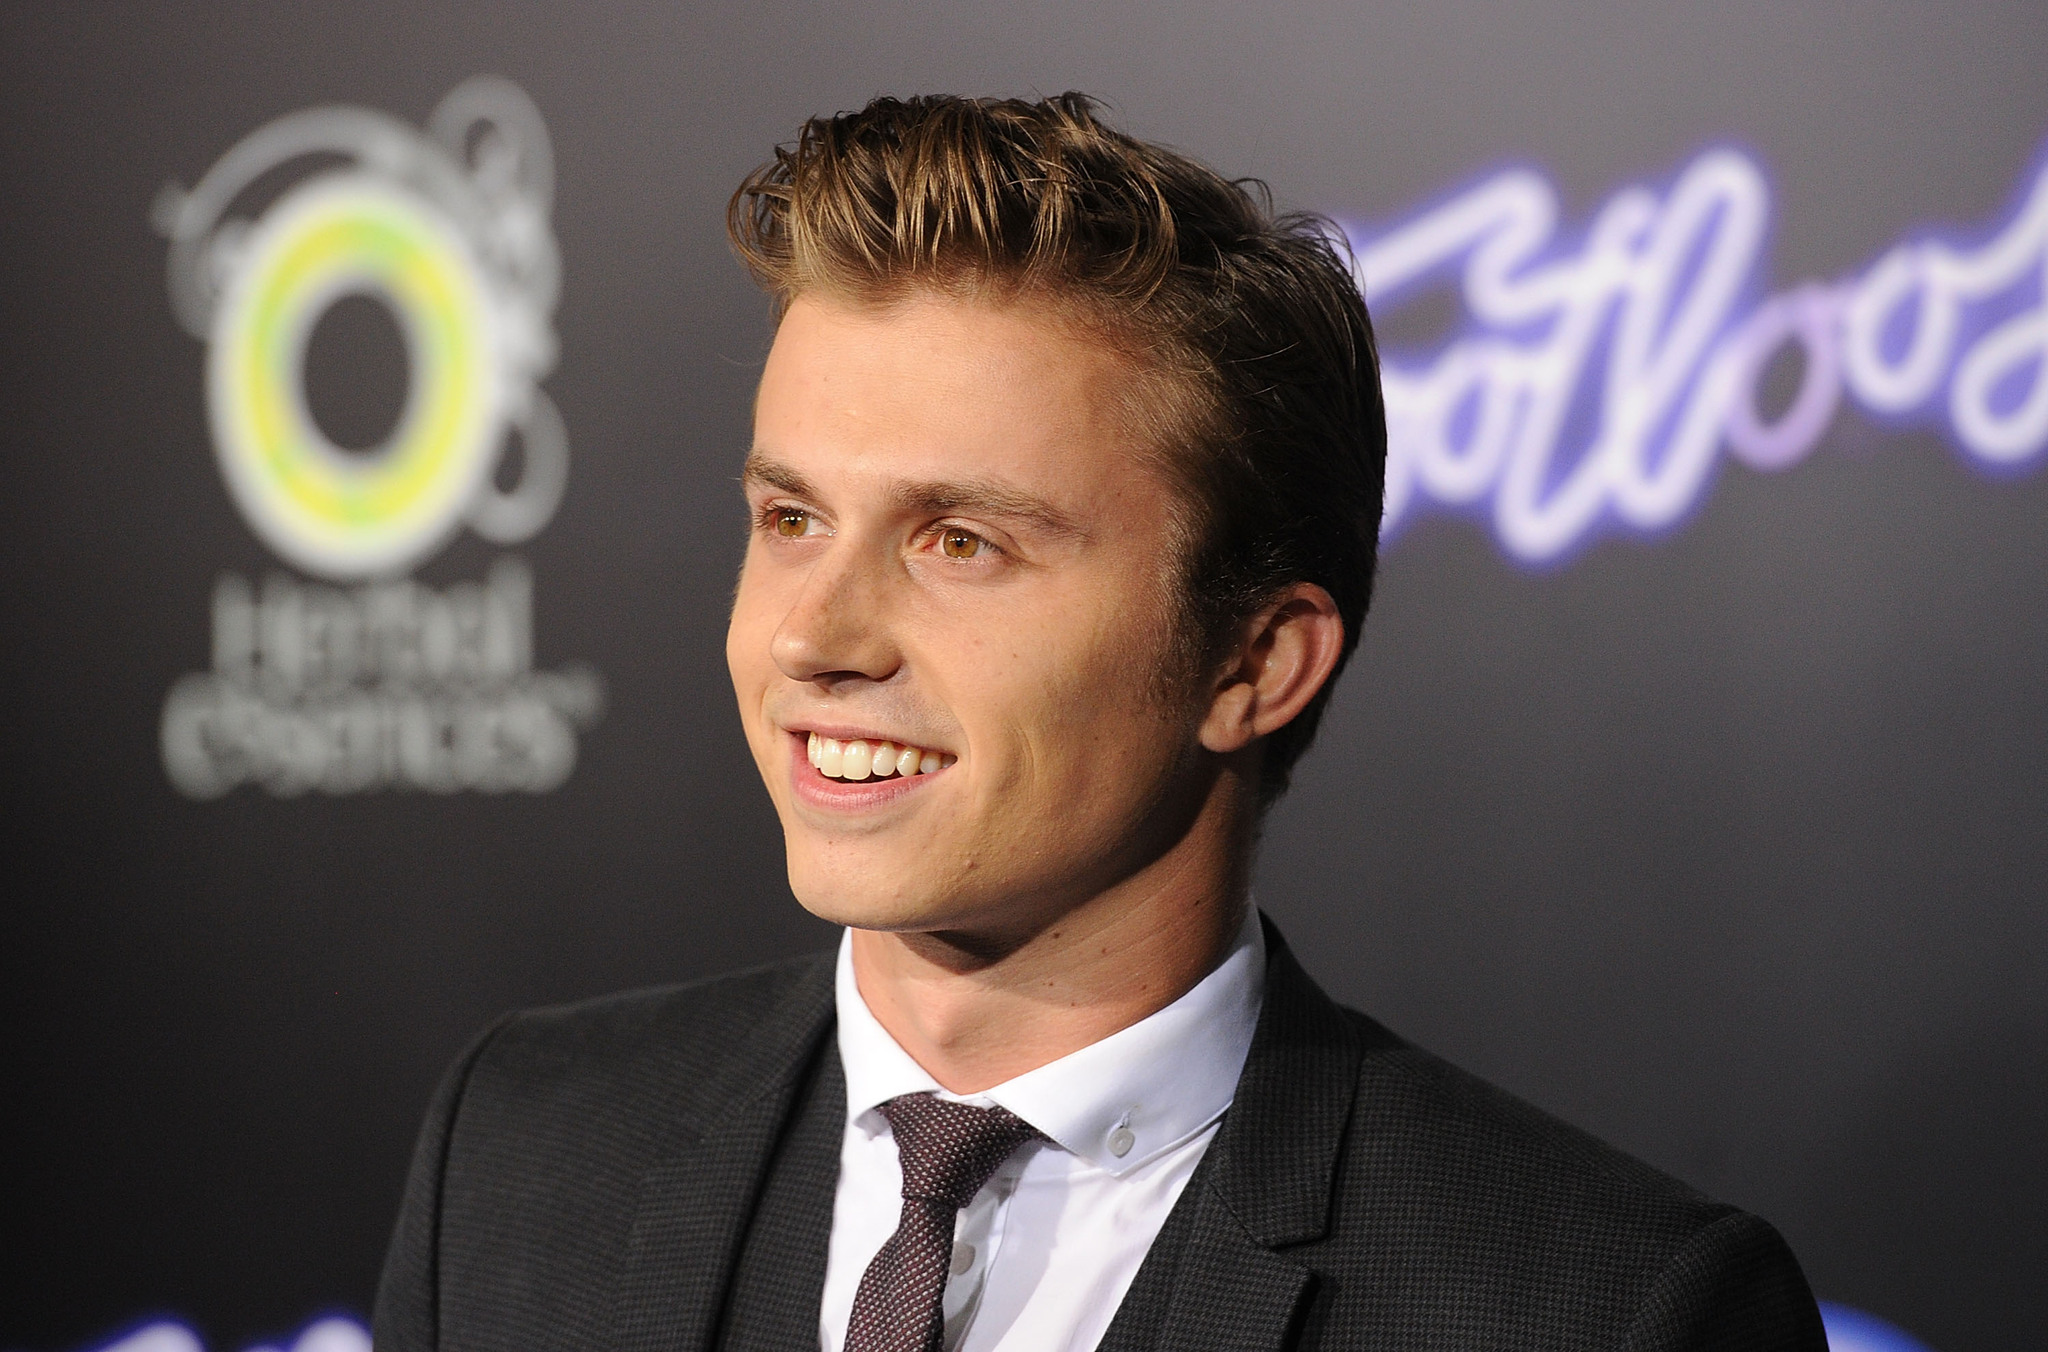 Kenny Wormald at event of Pamise del sokiu (2011)